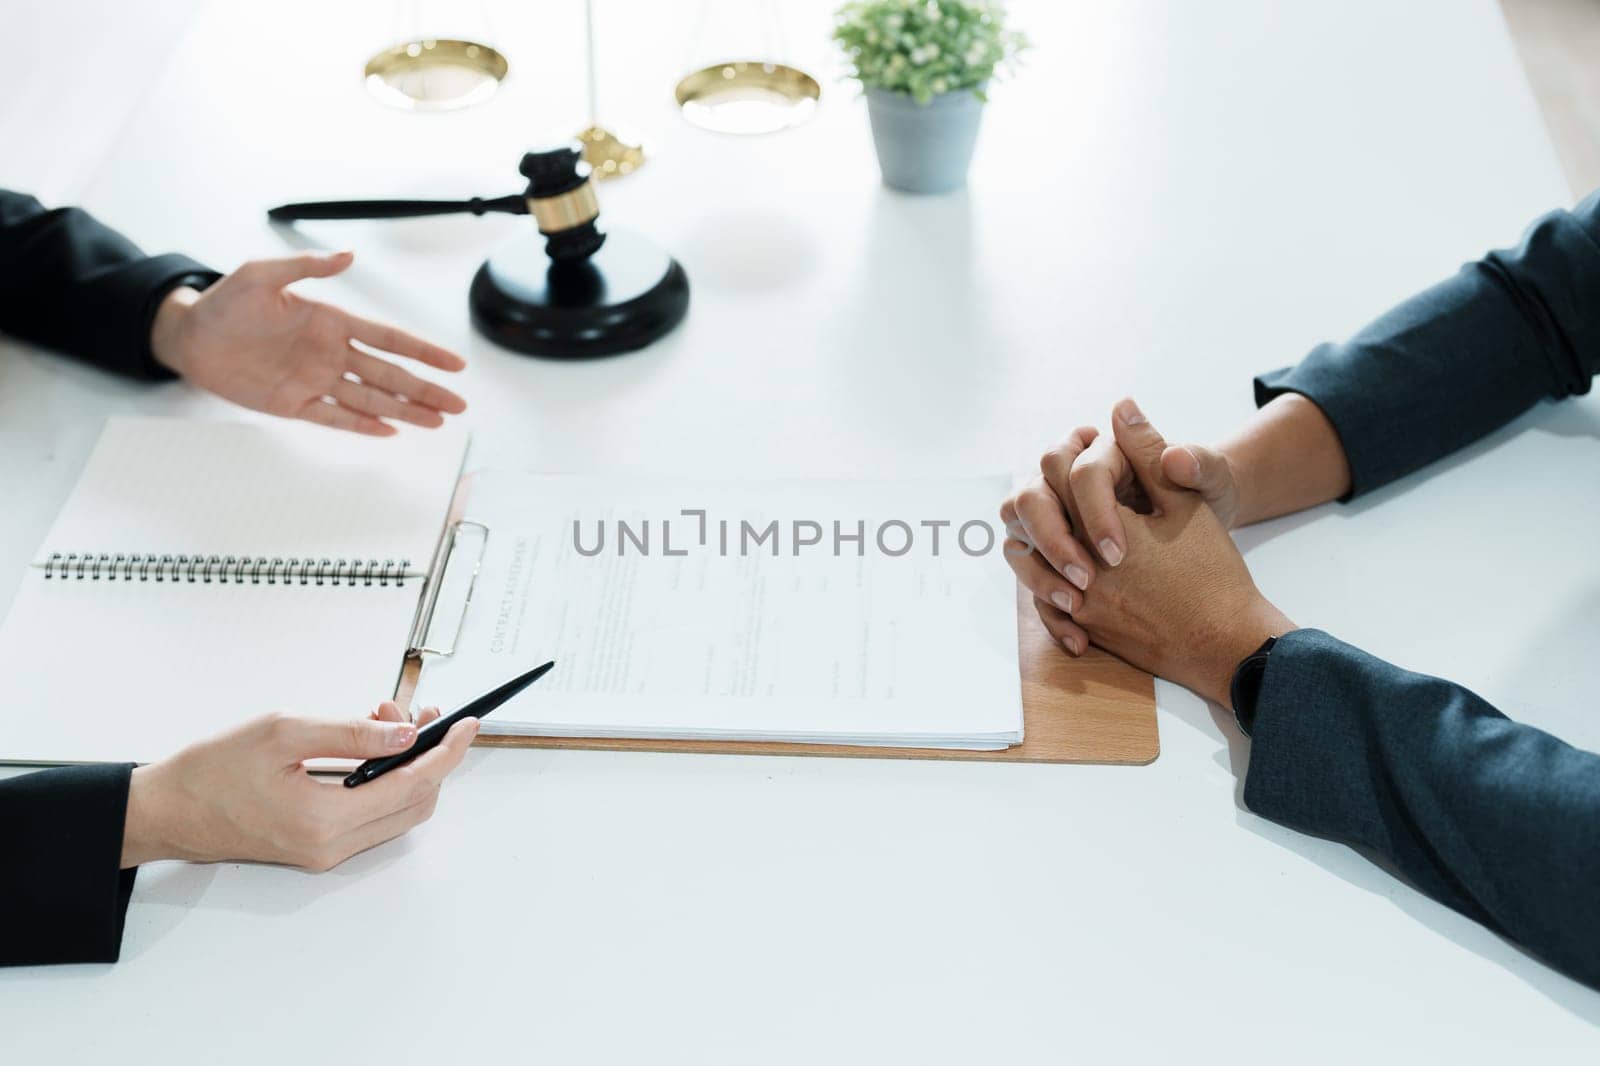 The signing of important documents between the lawyer and the client to enter into an agreement in a court case.